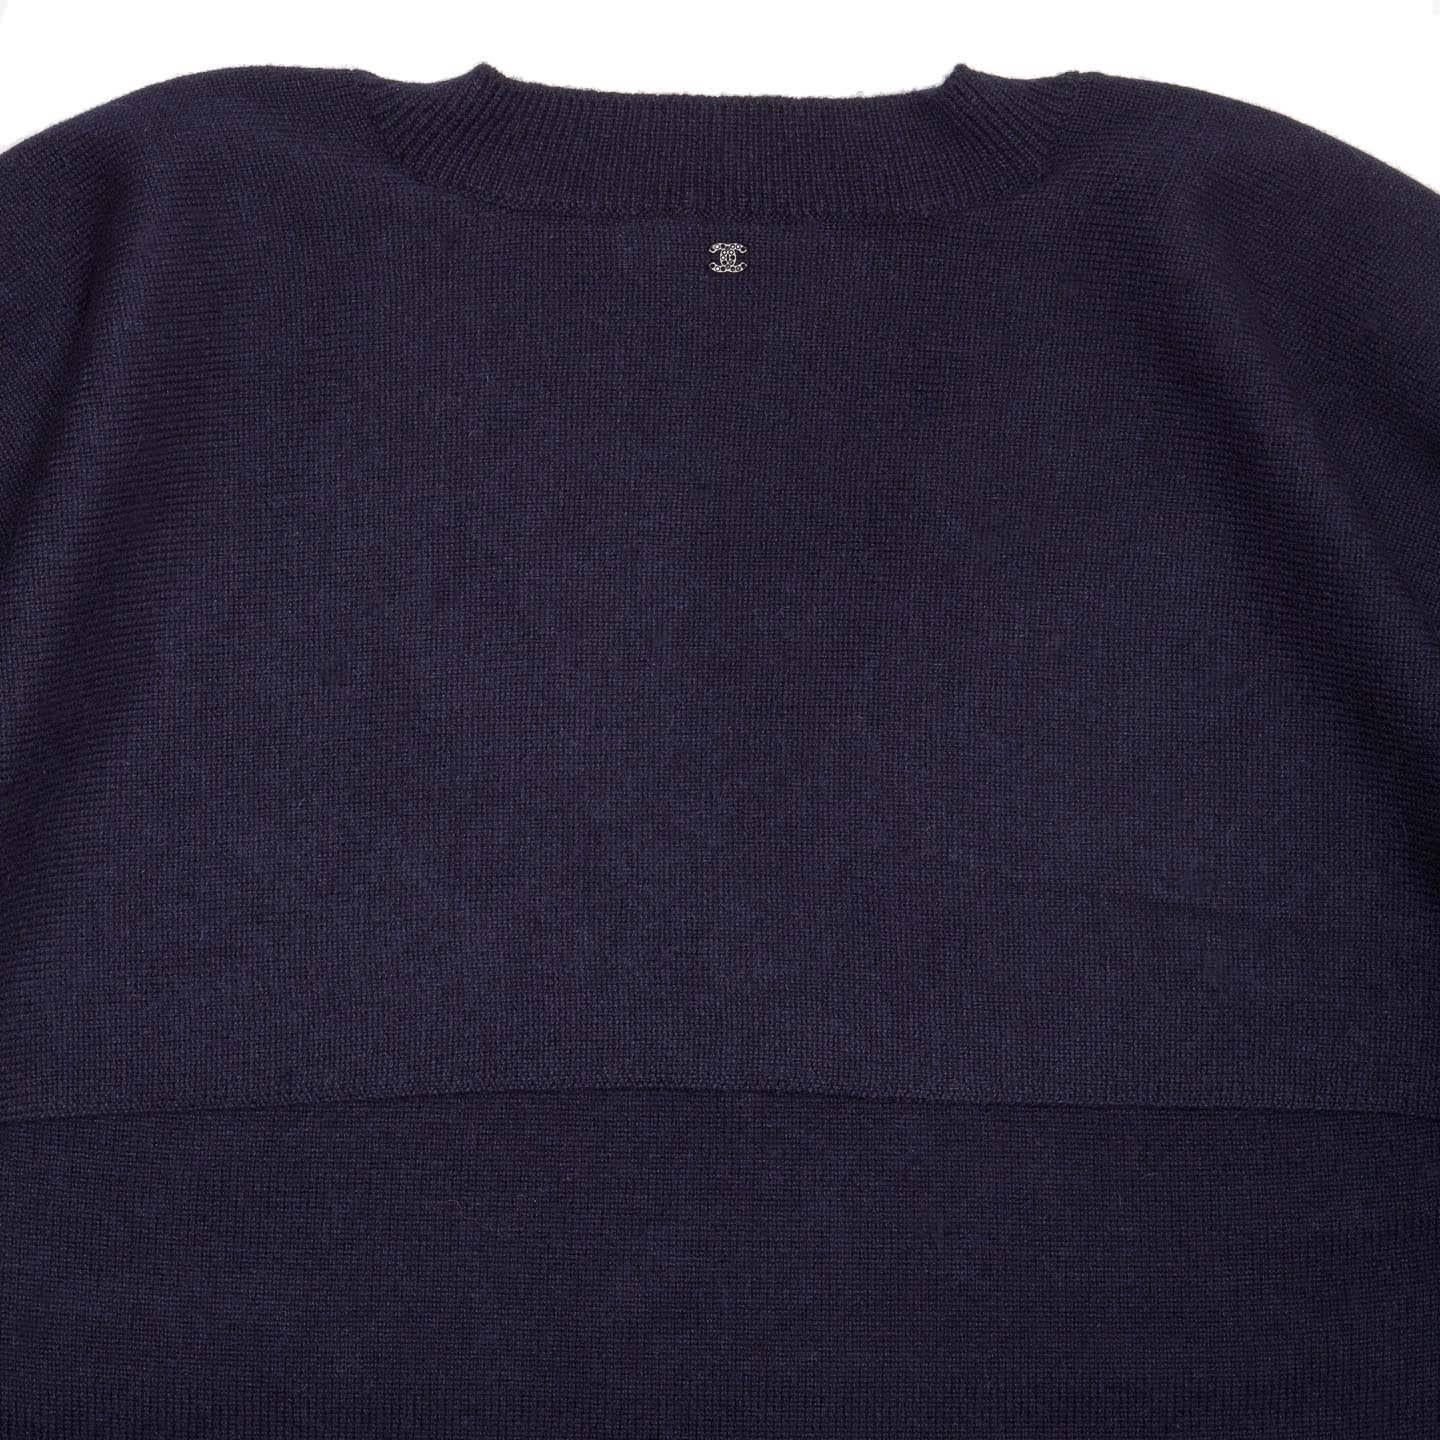 Women's Chanel Navy Cashmere Short Kimono Style Sleeved Sweater For Sale